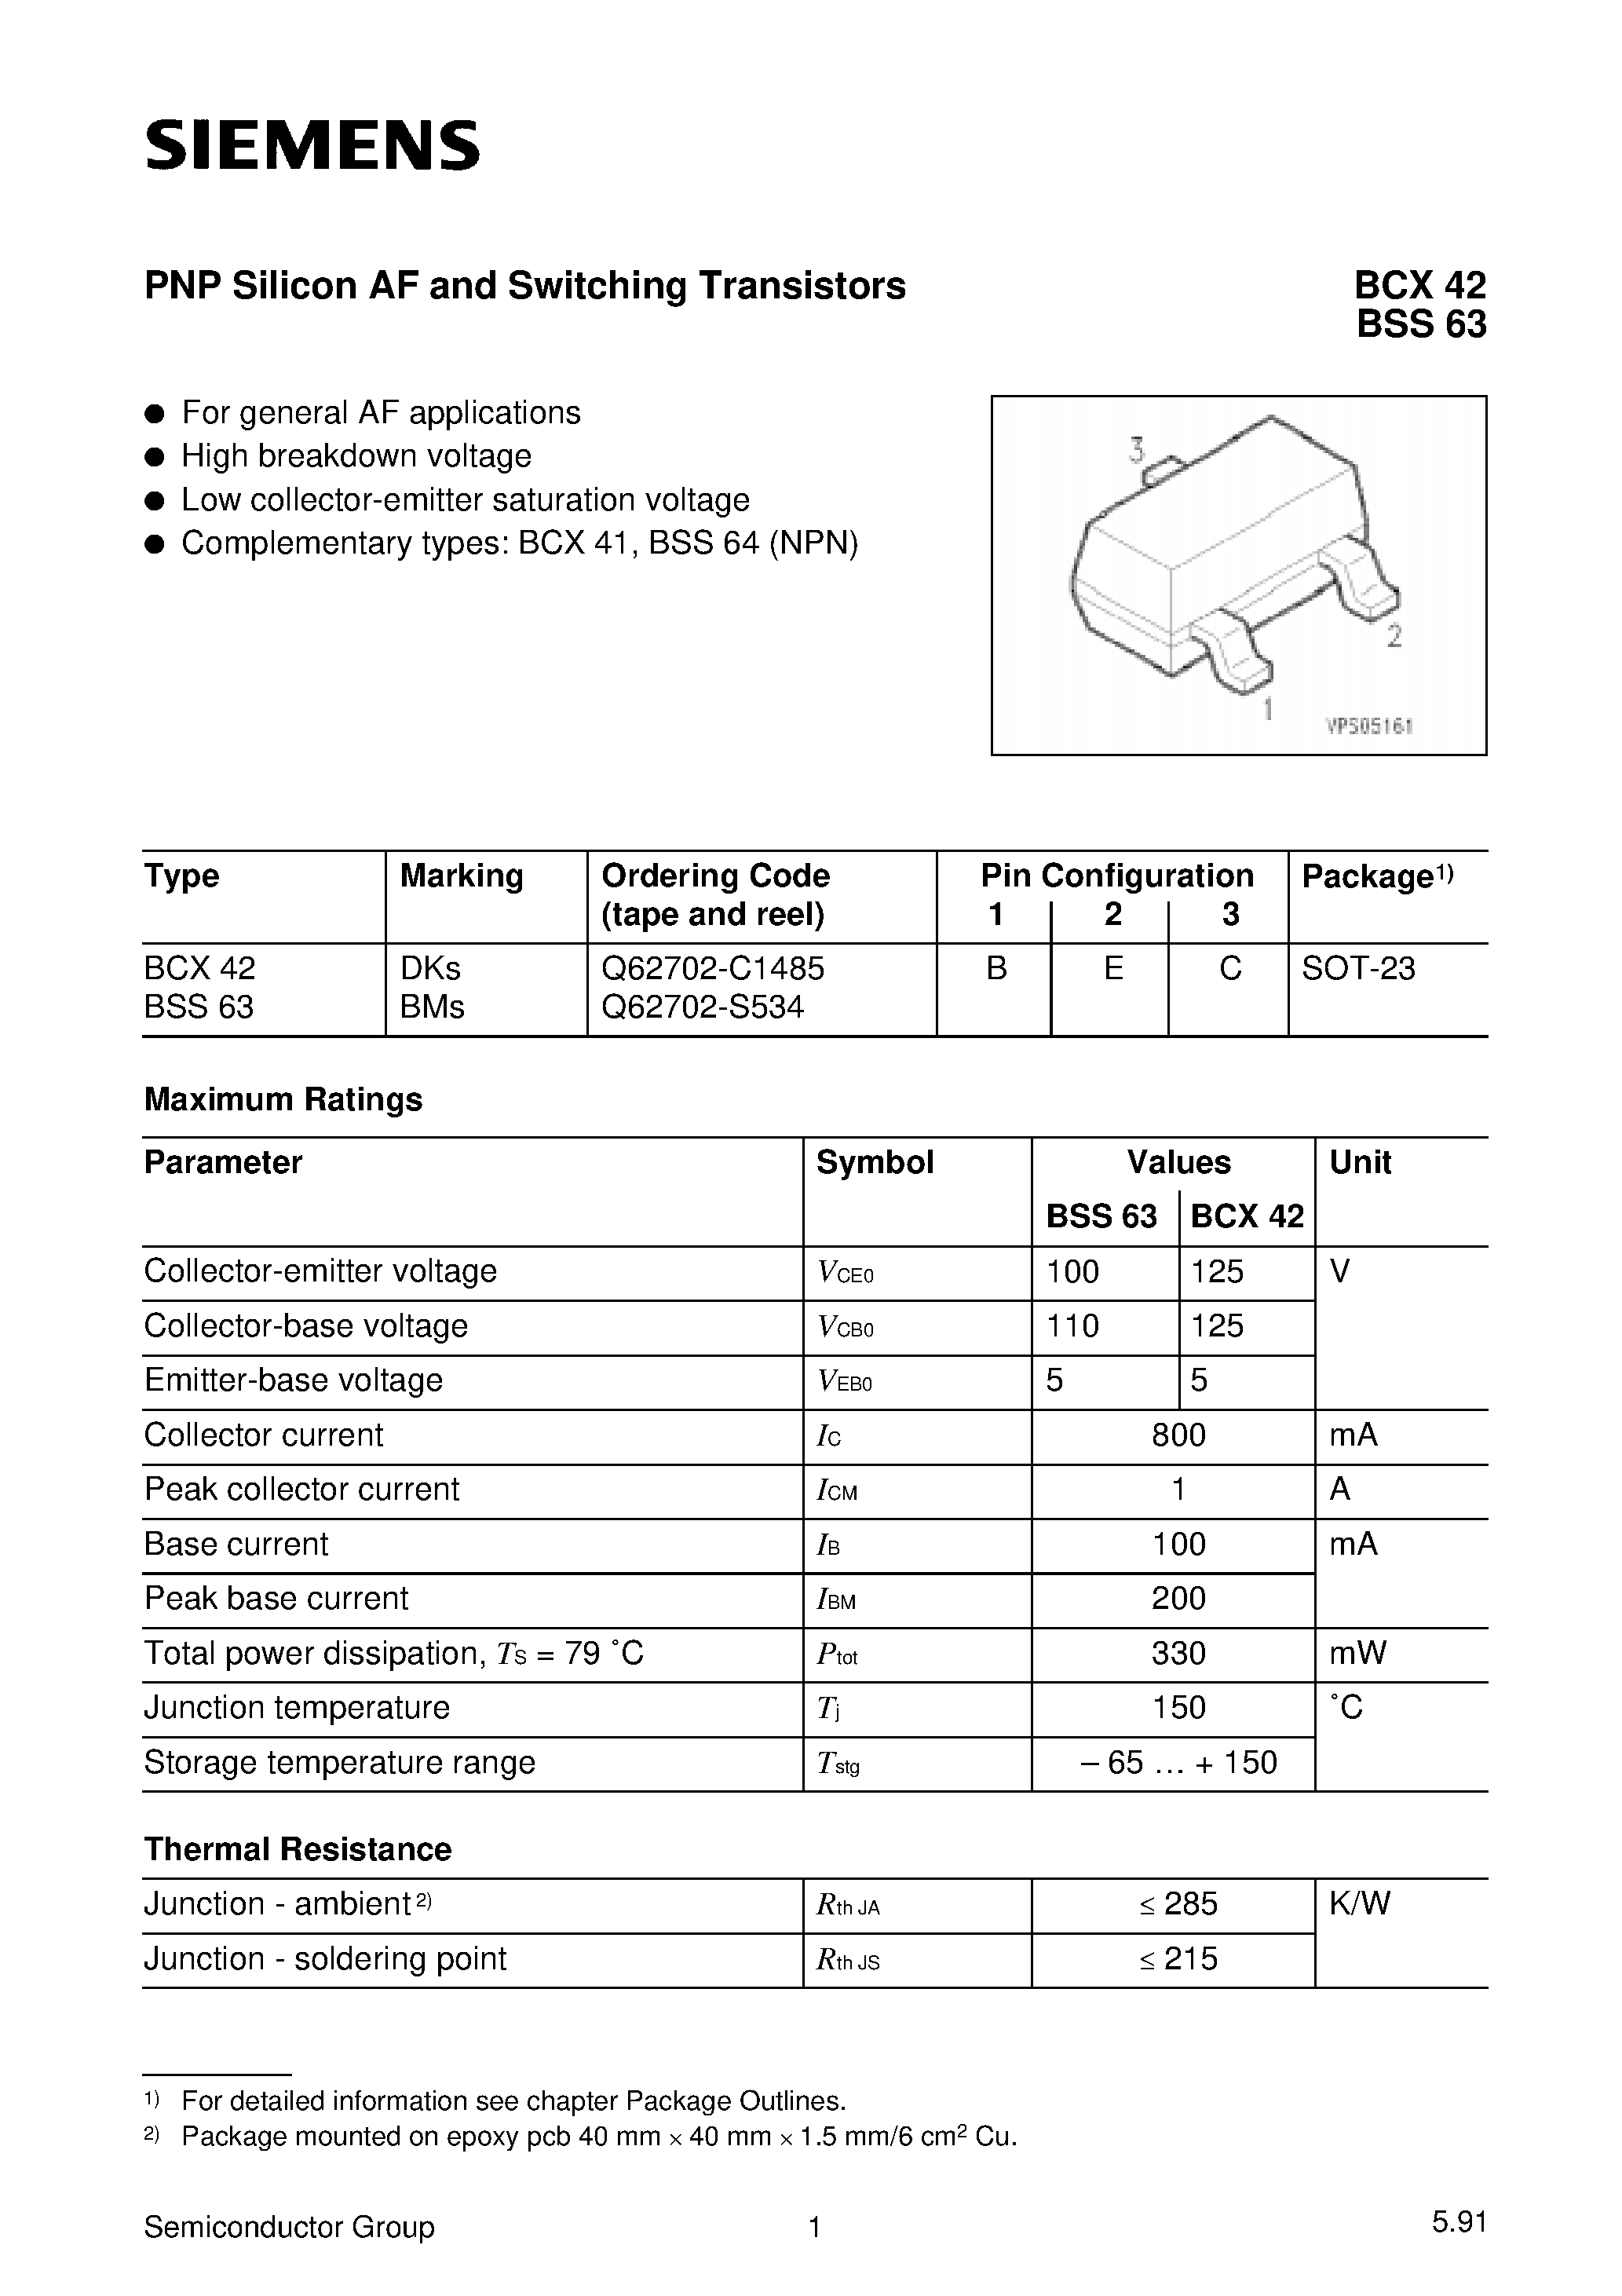 Datasheet BCX42 - PNP Silicon AF and Switching Transistors (For general AF applications High breakdown voltage) page 1